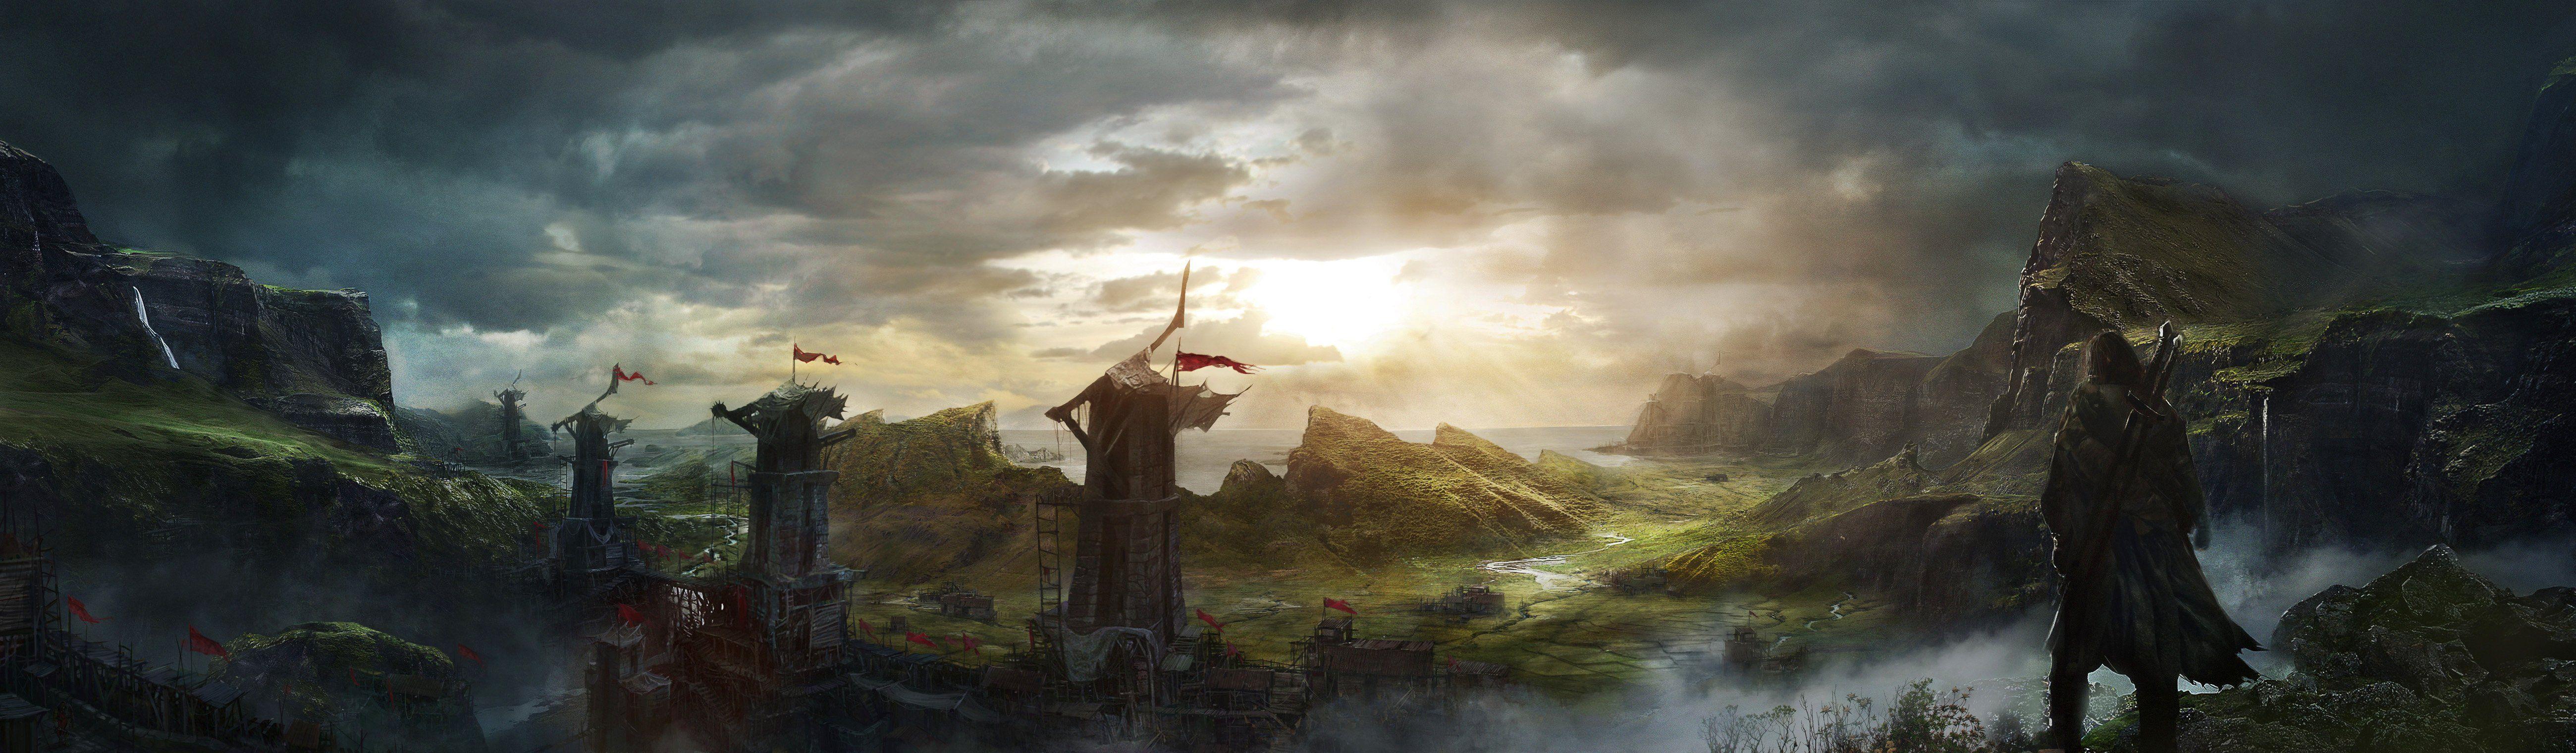 Middle Earth Wallpapers - Top Free Middle Earth Backgrounds ...